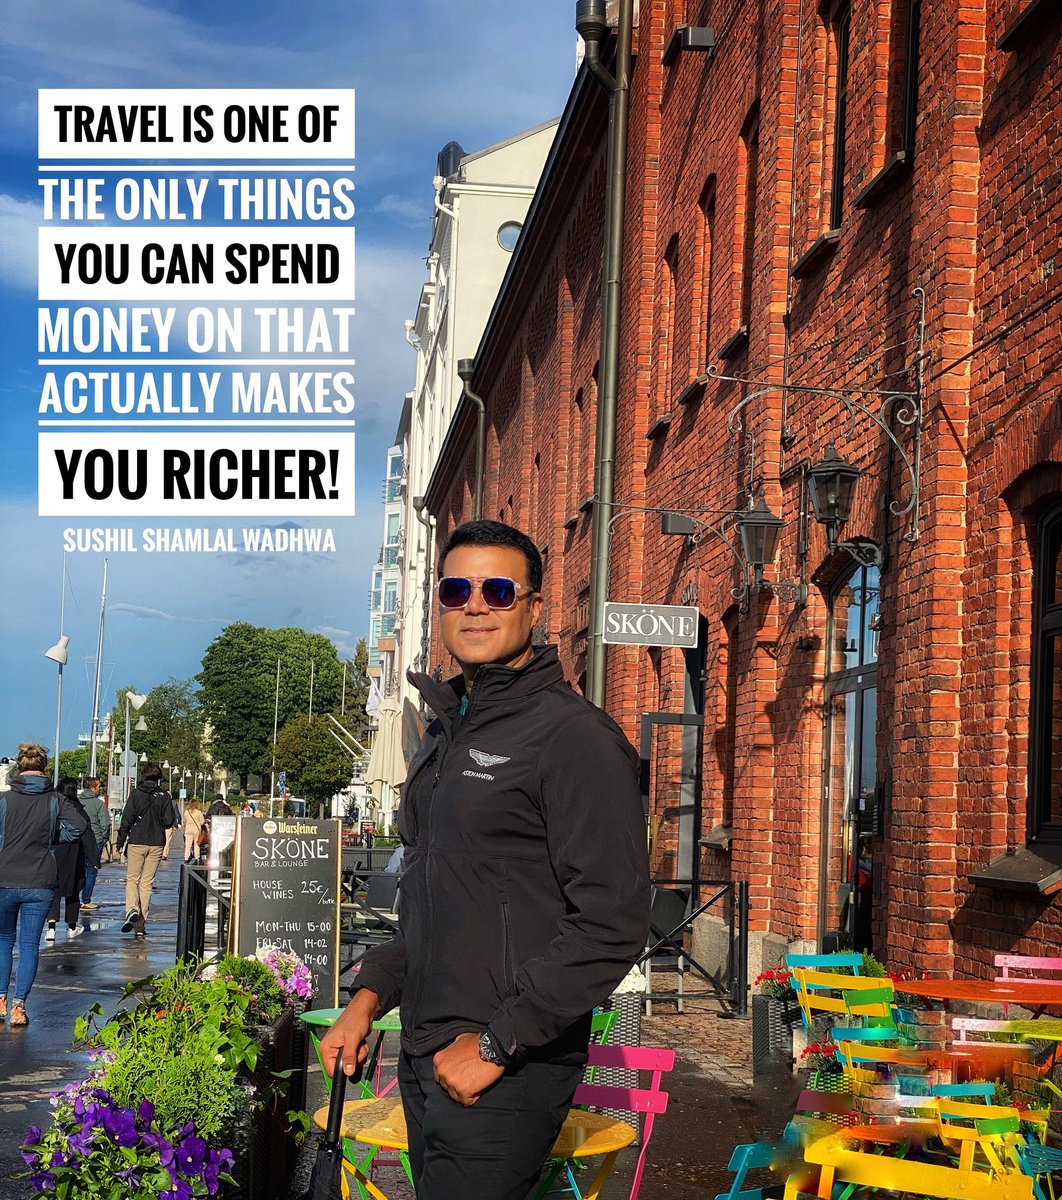 TRAVEL IS ONE OF THE ONLY THINGS YOU CAN SPEND MONEY ON THAT ACTUALLY MAKES YOU RICHER!
#FamilyVacation  @PSExperiences1 
#company #offsite @PWGrroup 
#wedding #celebration @PWeddingWorld 
#PrivateJet #LuxuryYacht #LuxuryRealEstate  @B_Lifestyle2018 
#SushilMedia #CelebratingLife